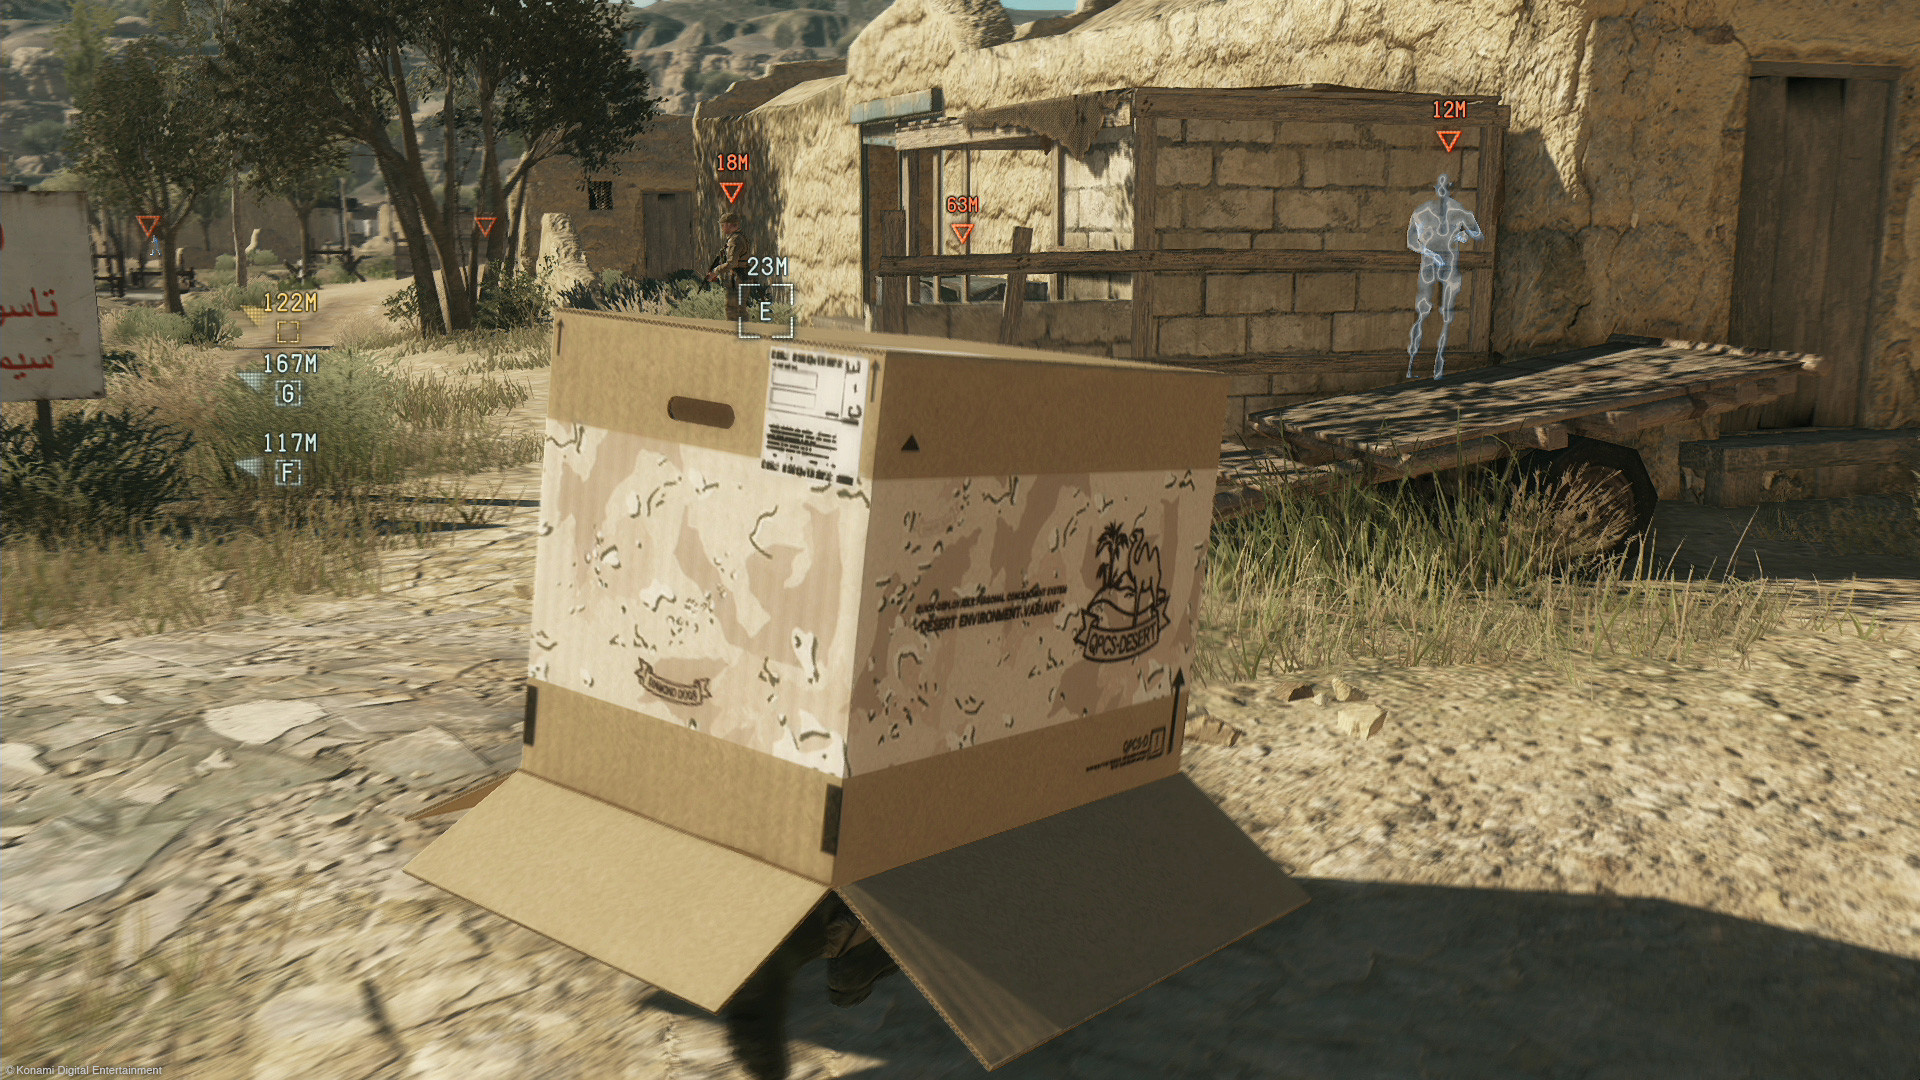 Soldiers Hide in Box to Evade AI Like Solid Snake in Metal Gear